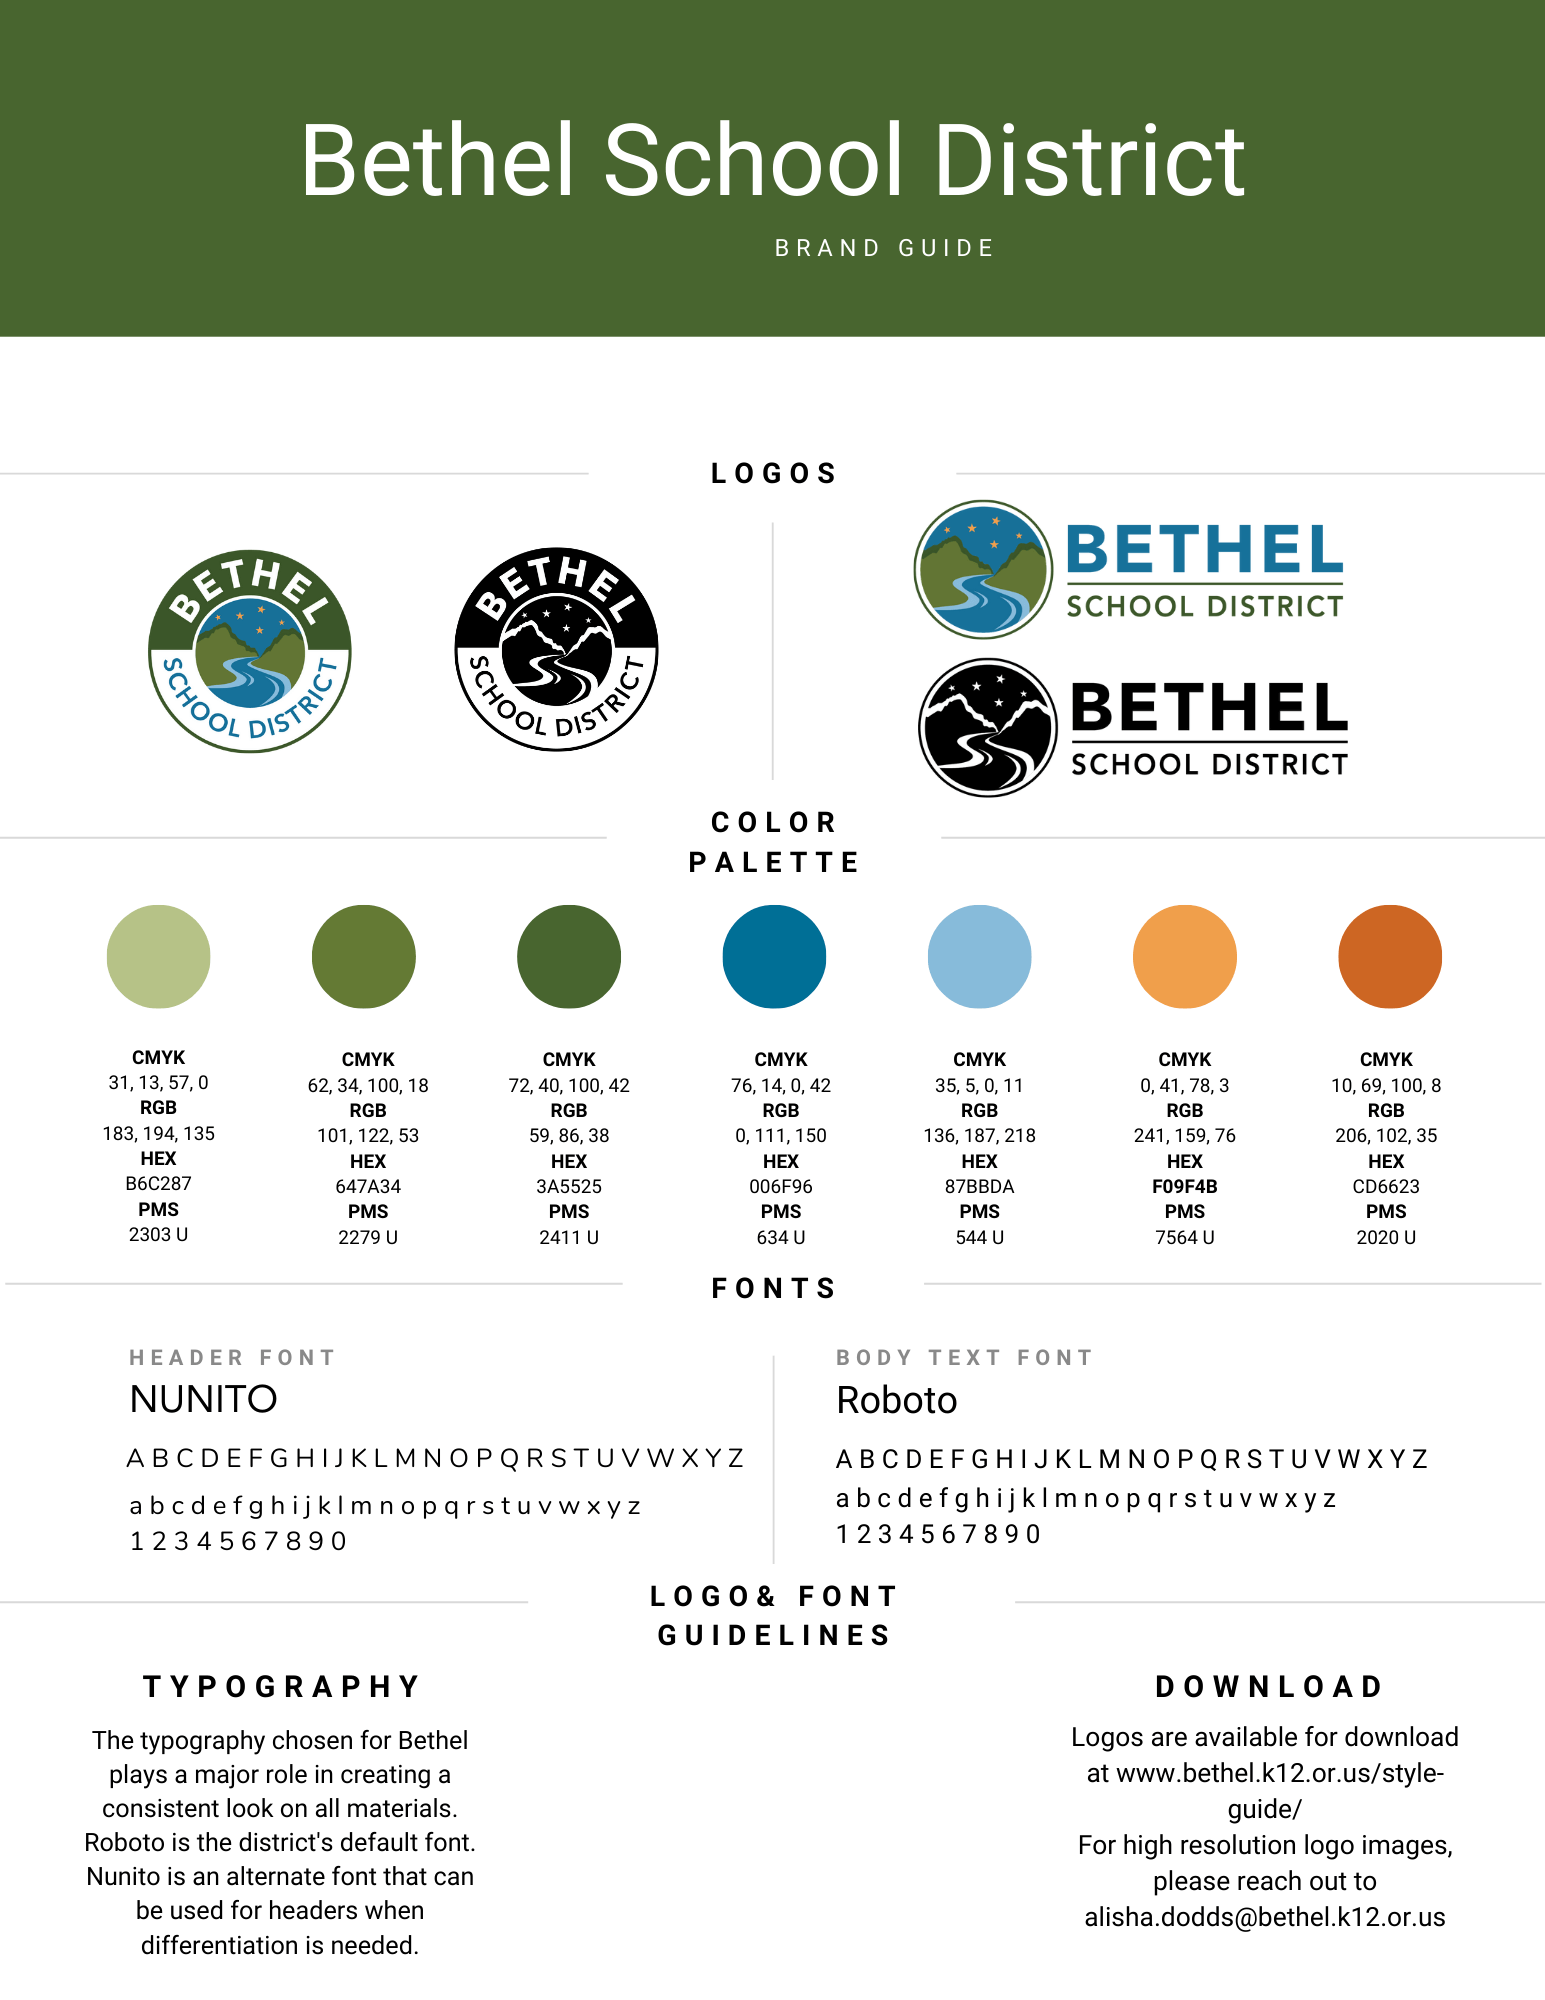 Brand guide complete with official colors, fonts and information about how to use elements